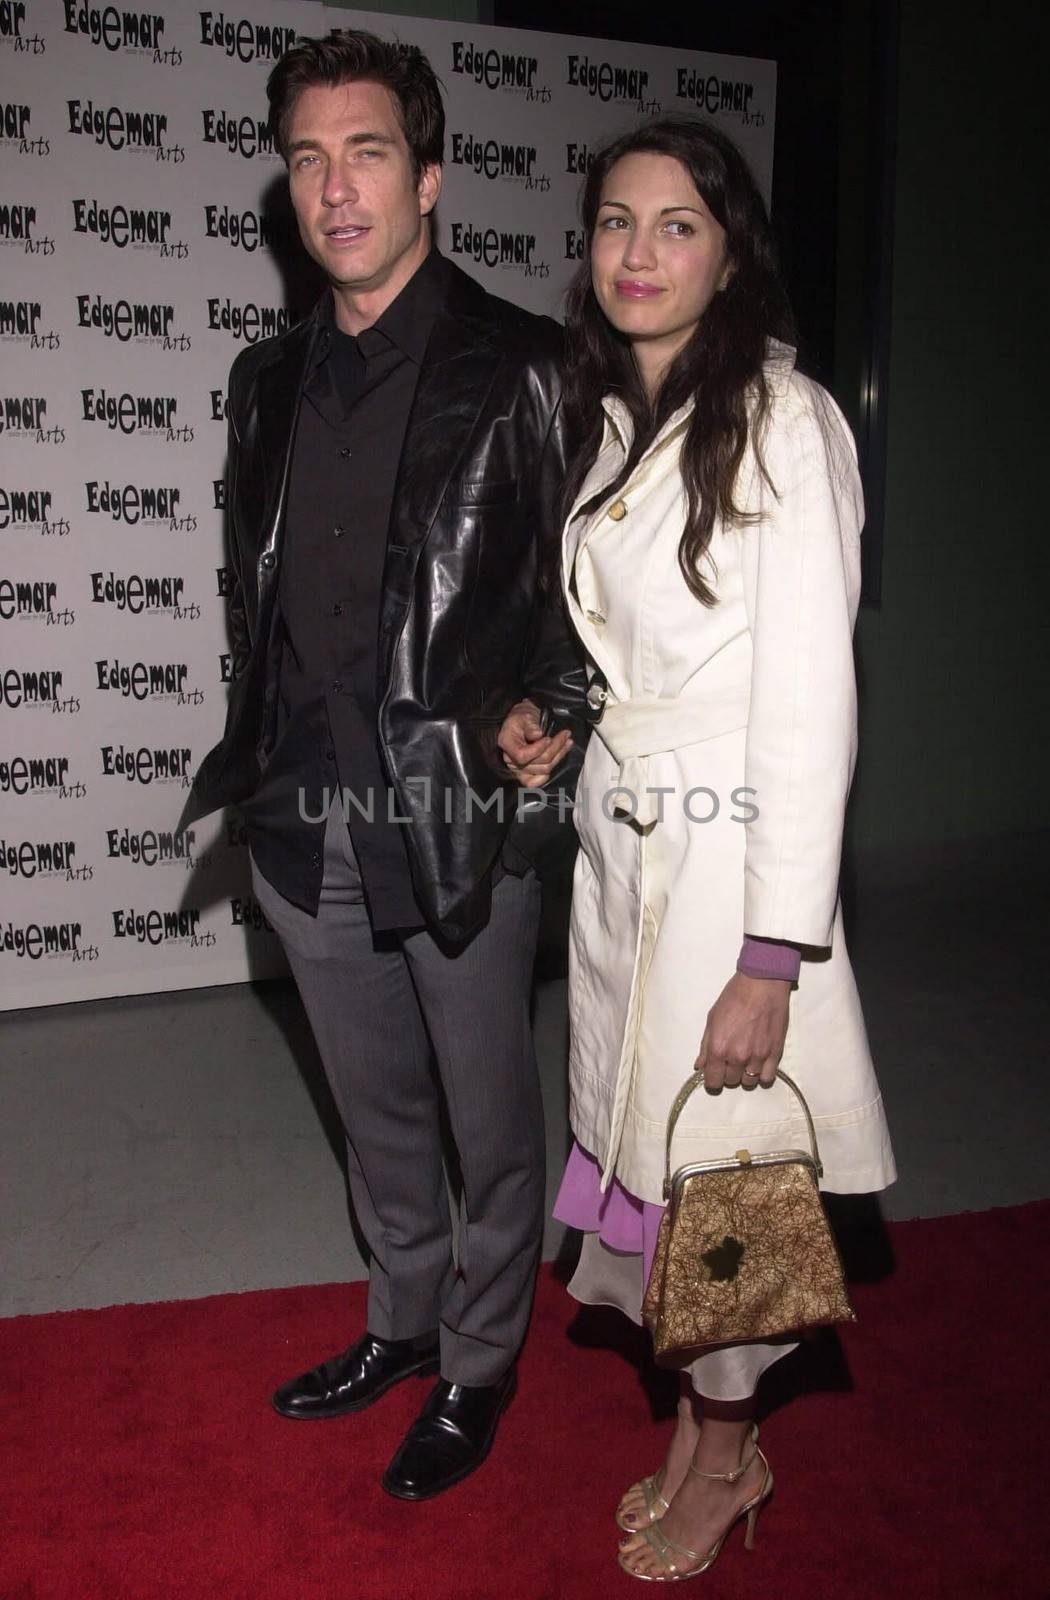 Dylan McDermott and Shiva Afshar at the "Starry Starry Night" fundraiser to benefit the Edgemar Center for the Arts. Santa Monica, 04-15-00